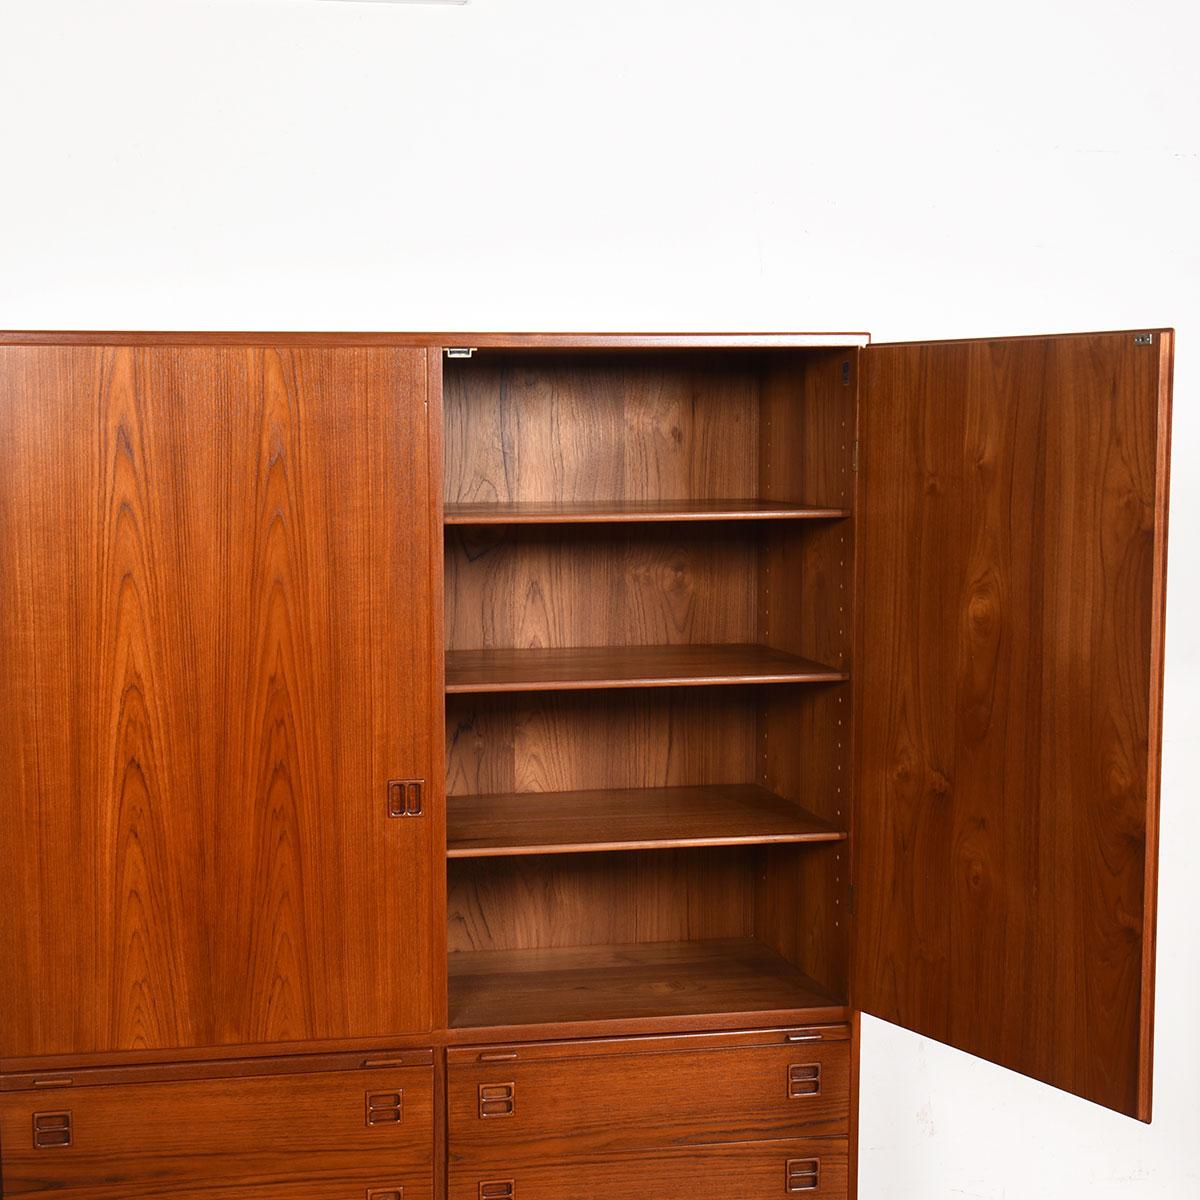 Stunning and hard to come by Danish Modern armoire designed by Arne Vodder. Plenty of storage for all of your wardrobe needs and gorgeous to behold.

Shelves in the upper portion for shirts and sweaters with small drawers for socks, intimates and